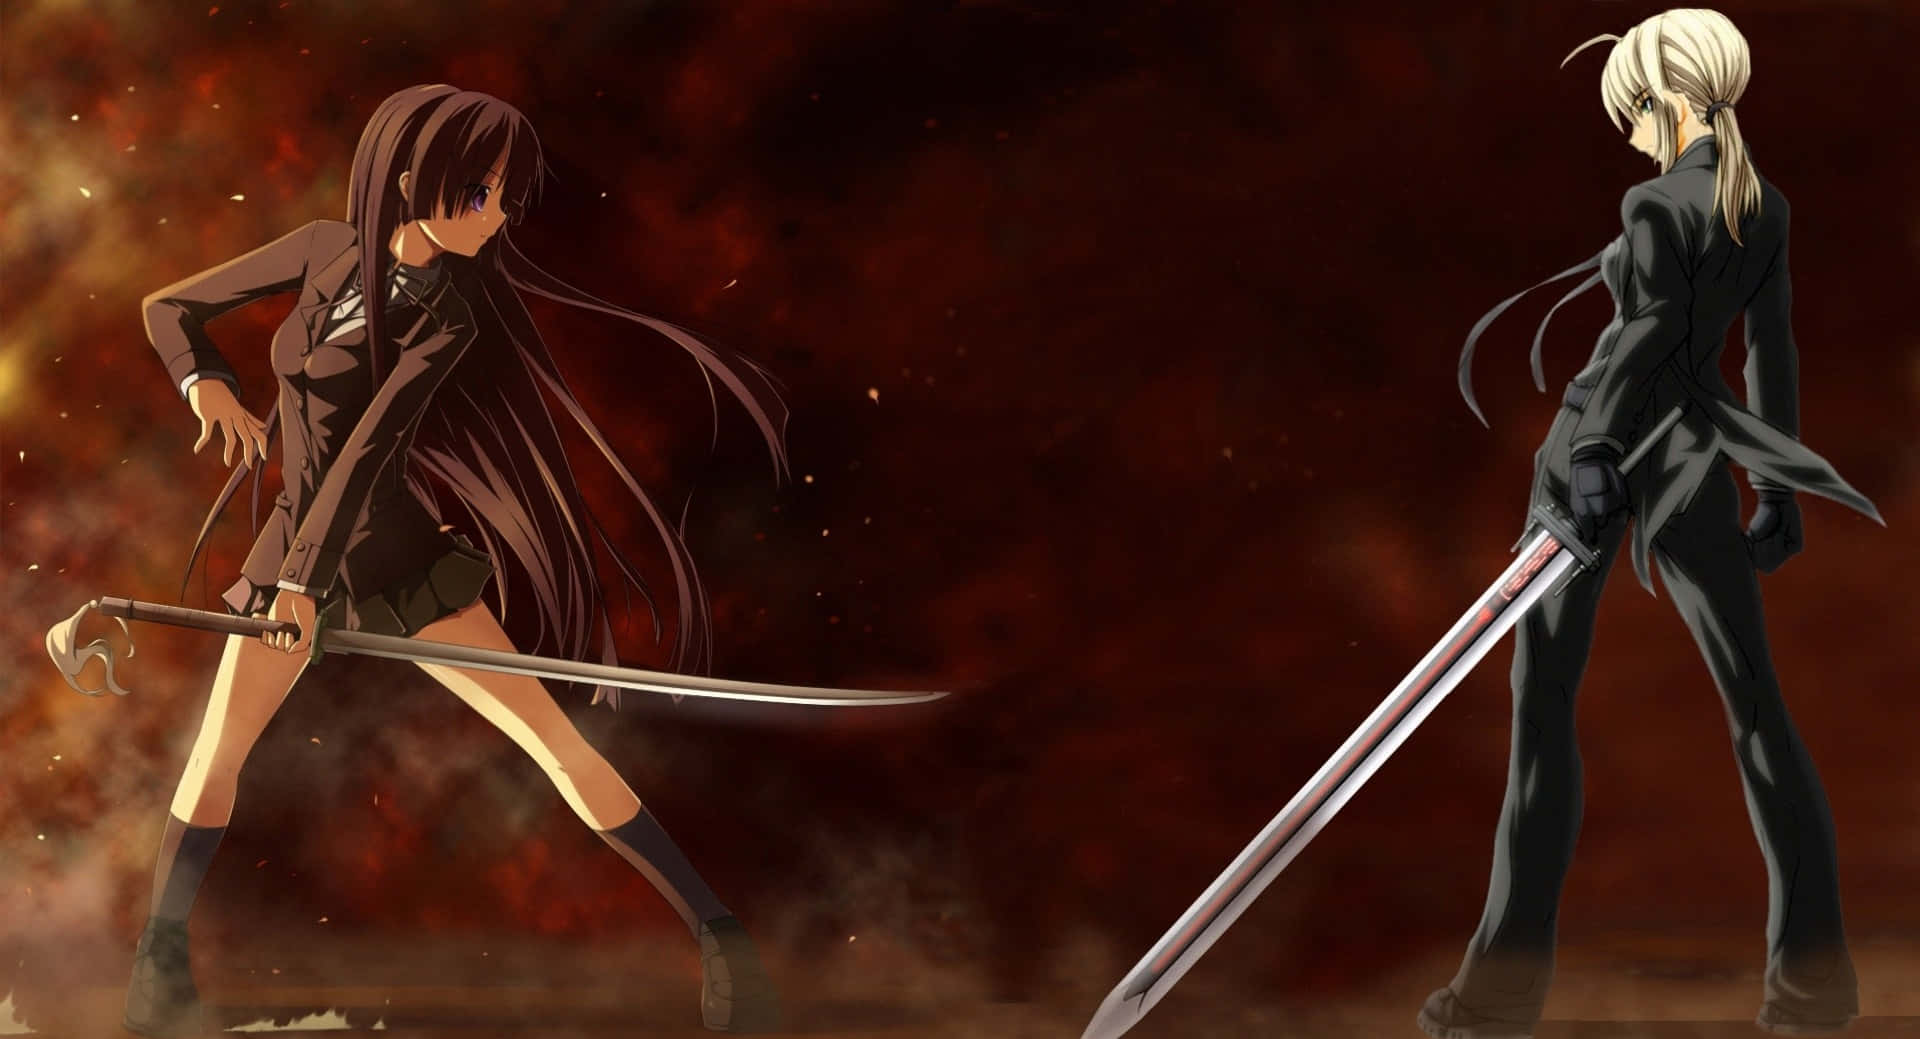 Two Anime Girls With Swords In Front Of A Fire